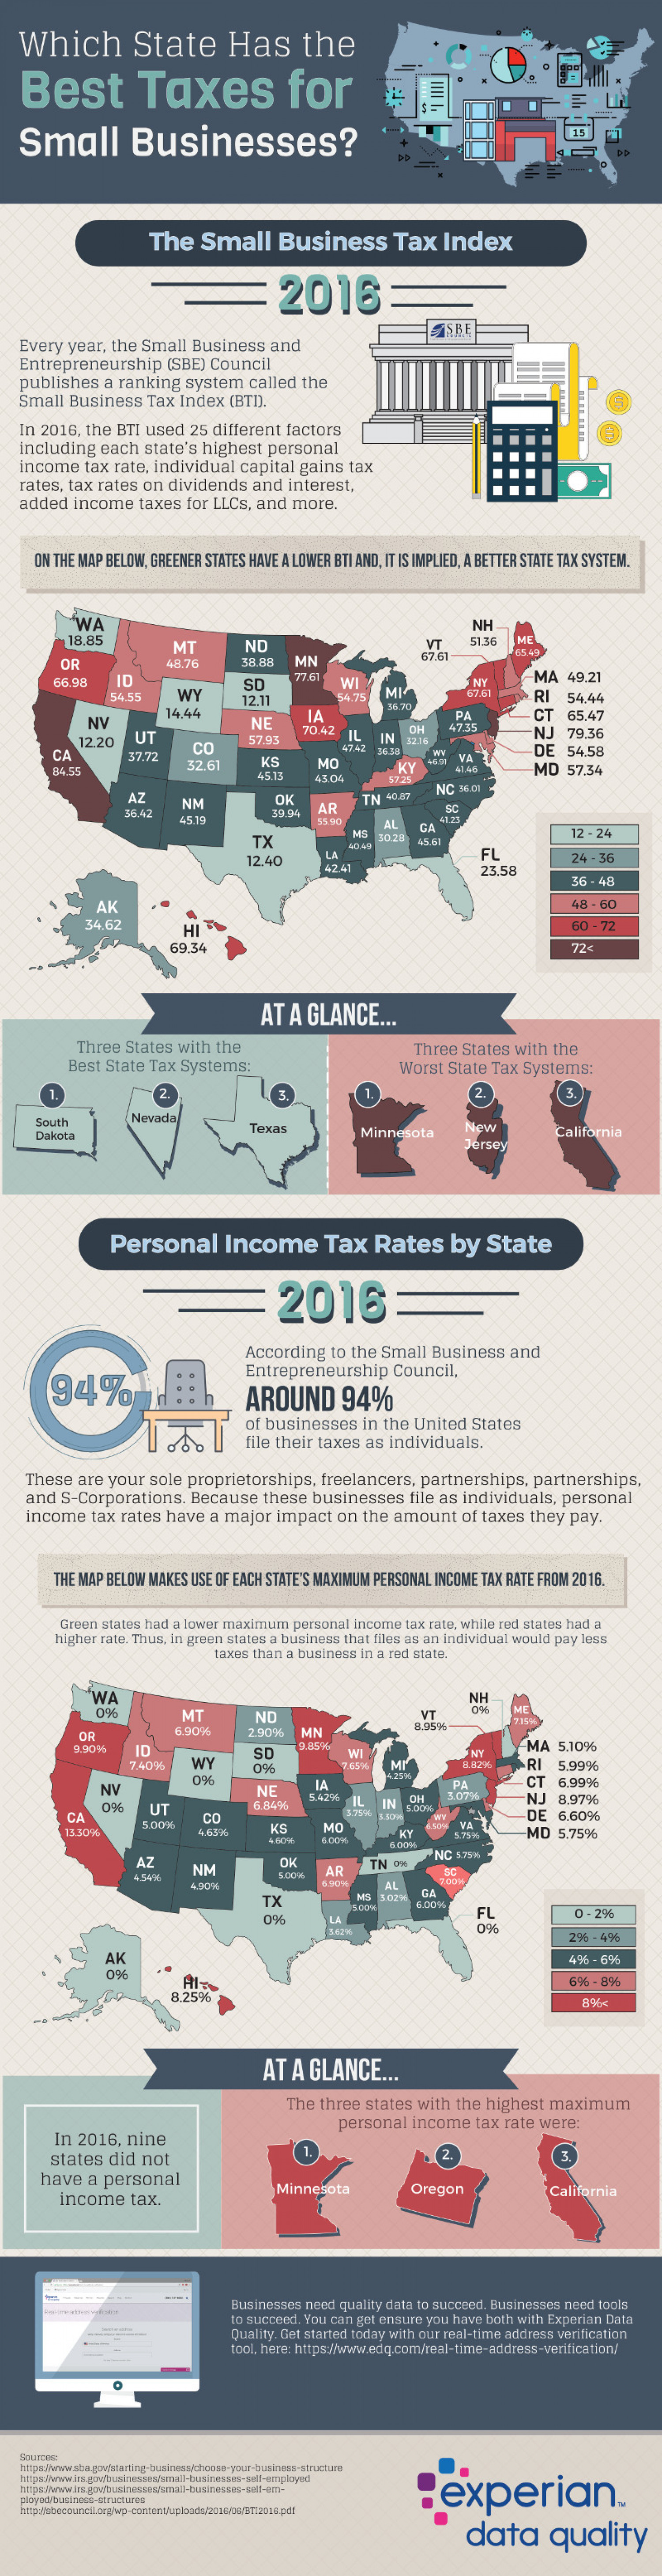 Which State Has the Best Taxes for Small Businesses? Infographic